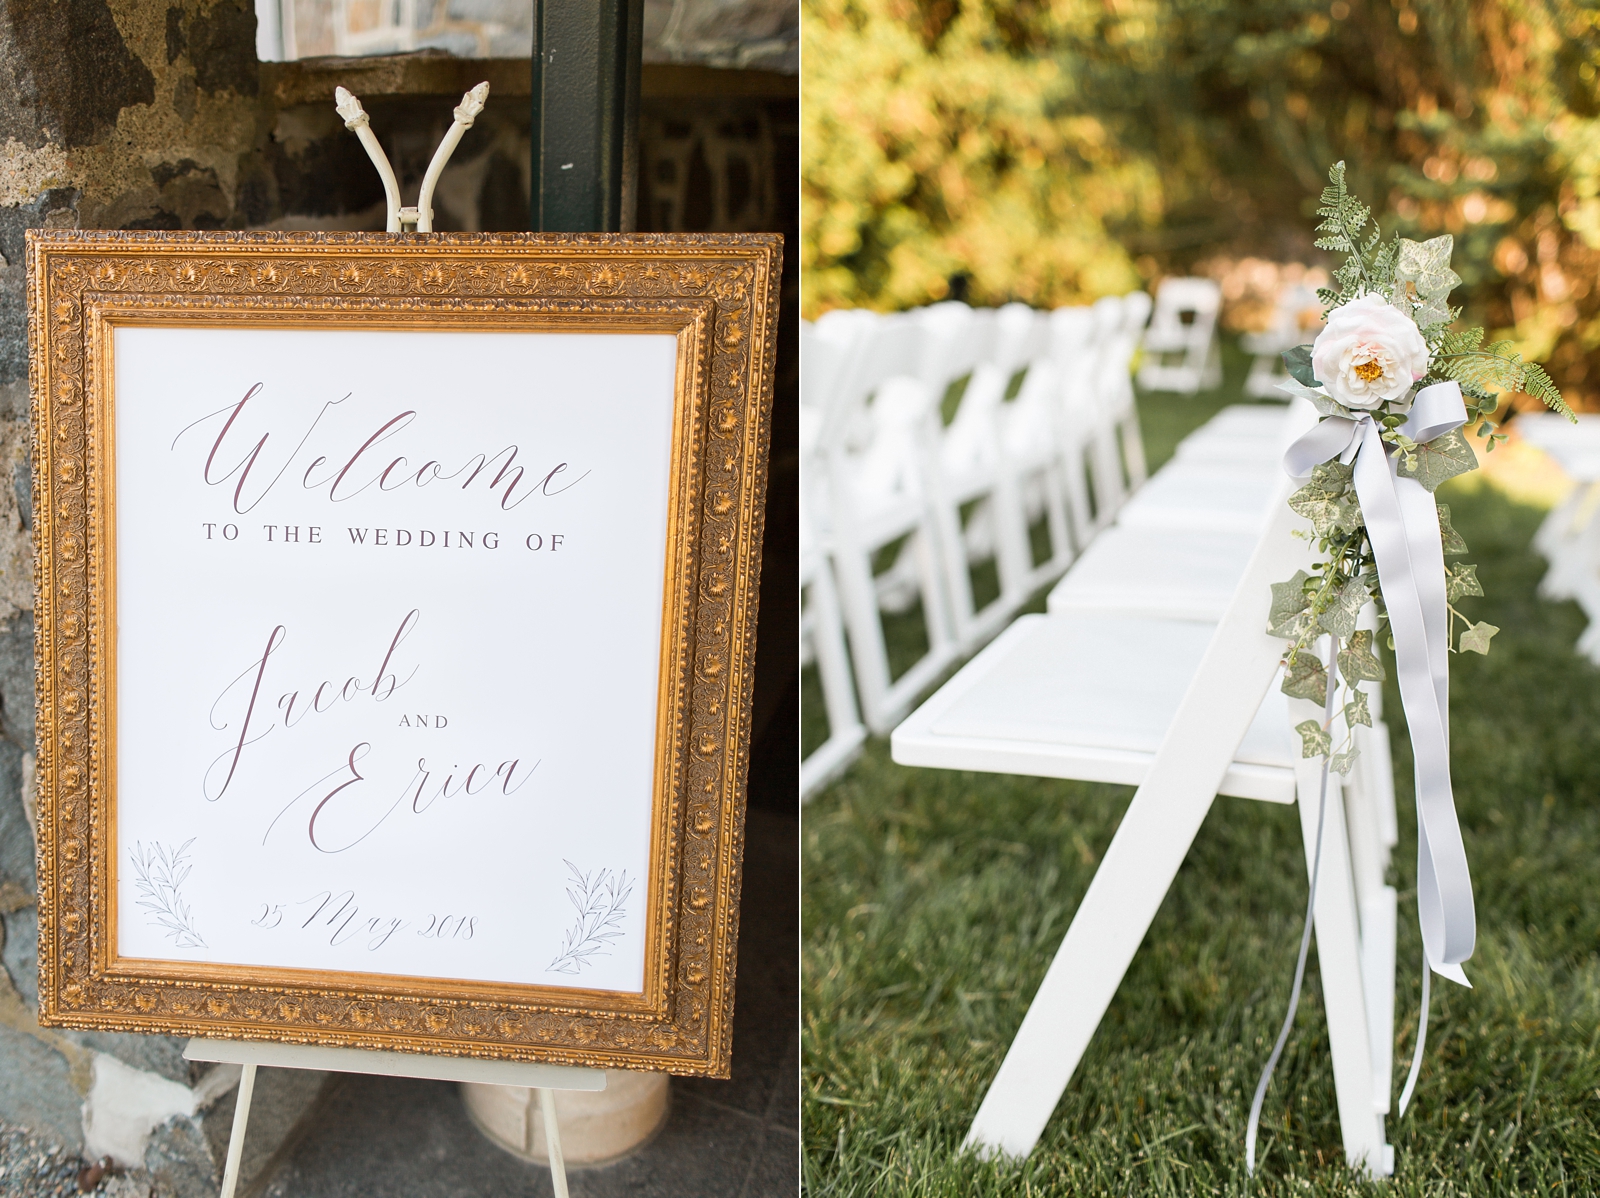 sign and white peonies on seats for lawn wedding ceremony at The Carriage House at Rockwood Park